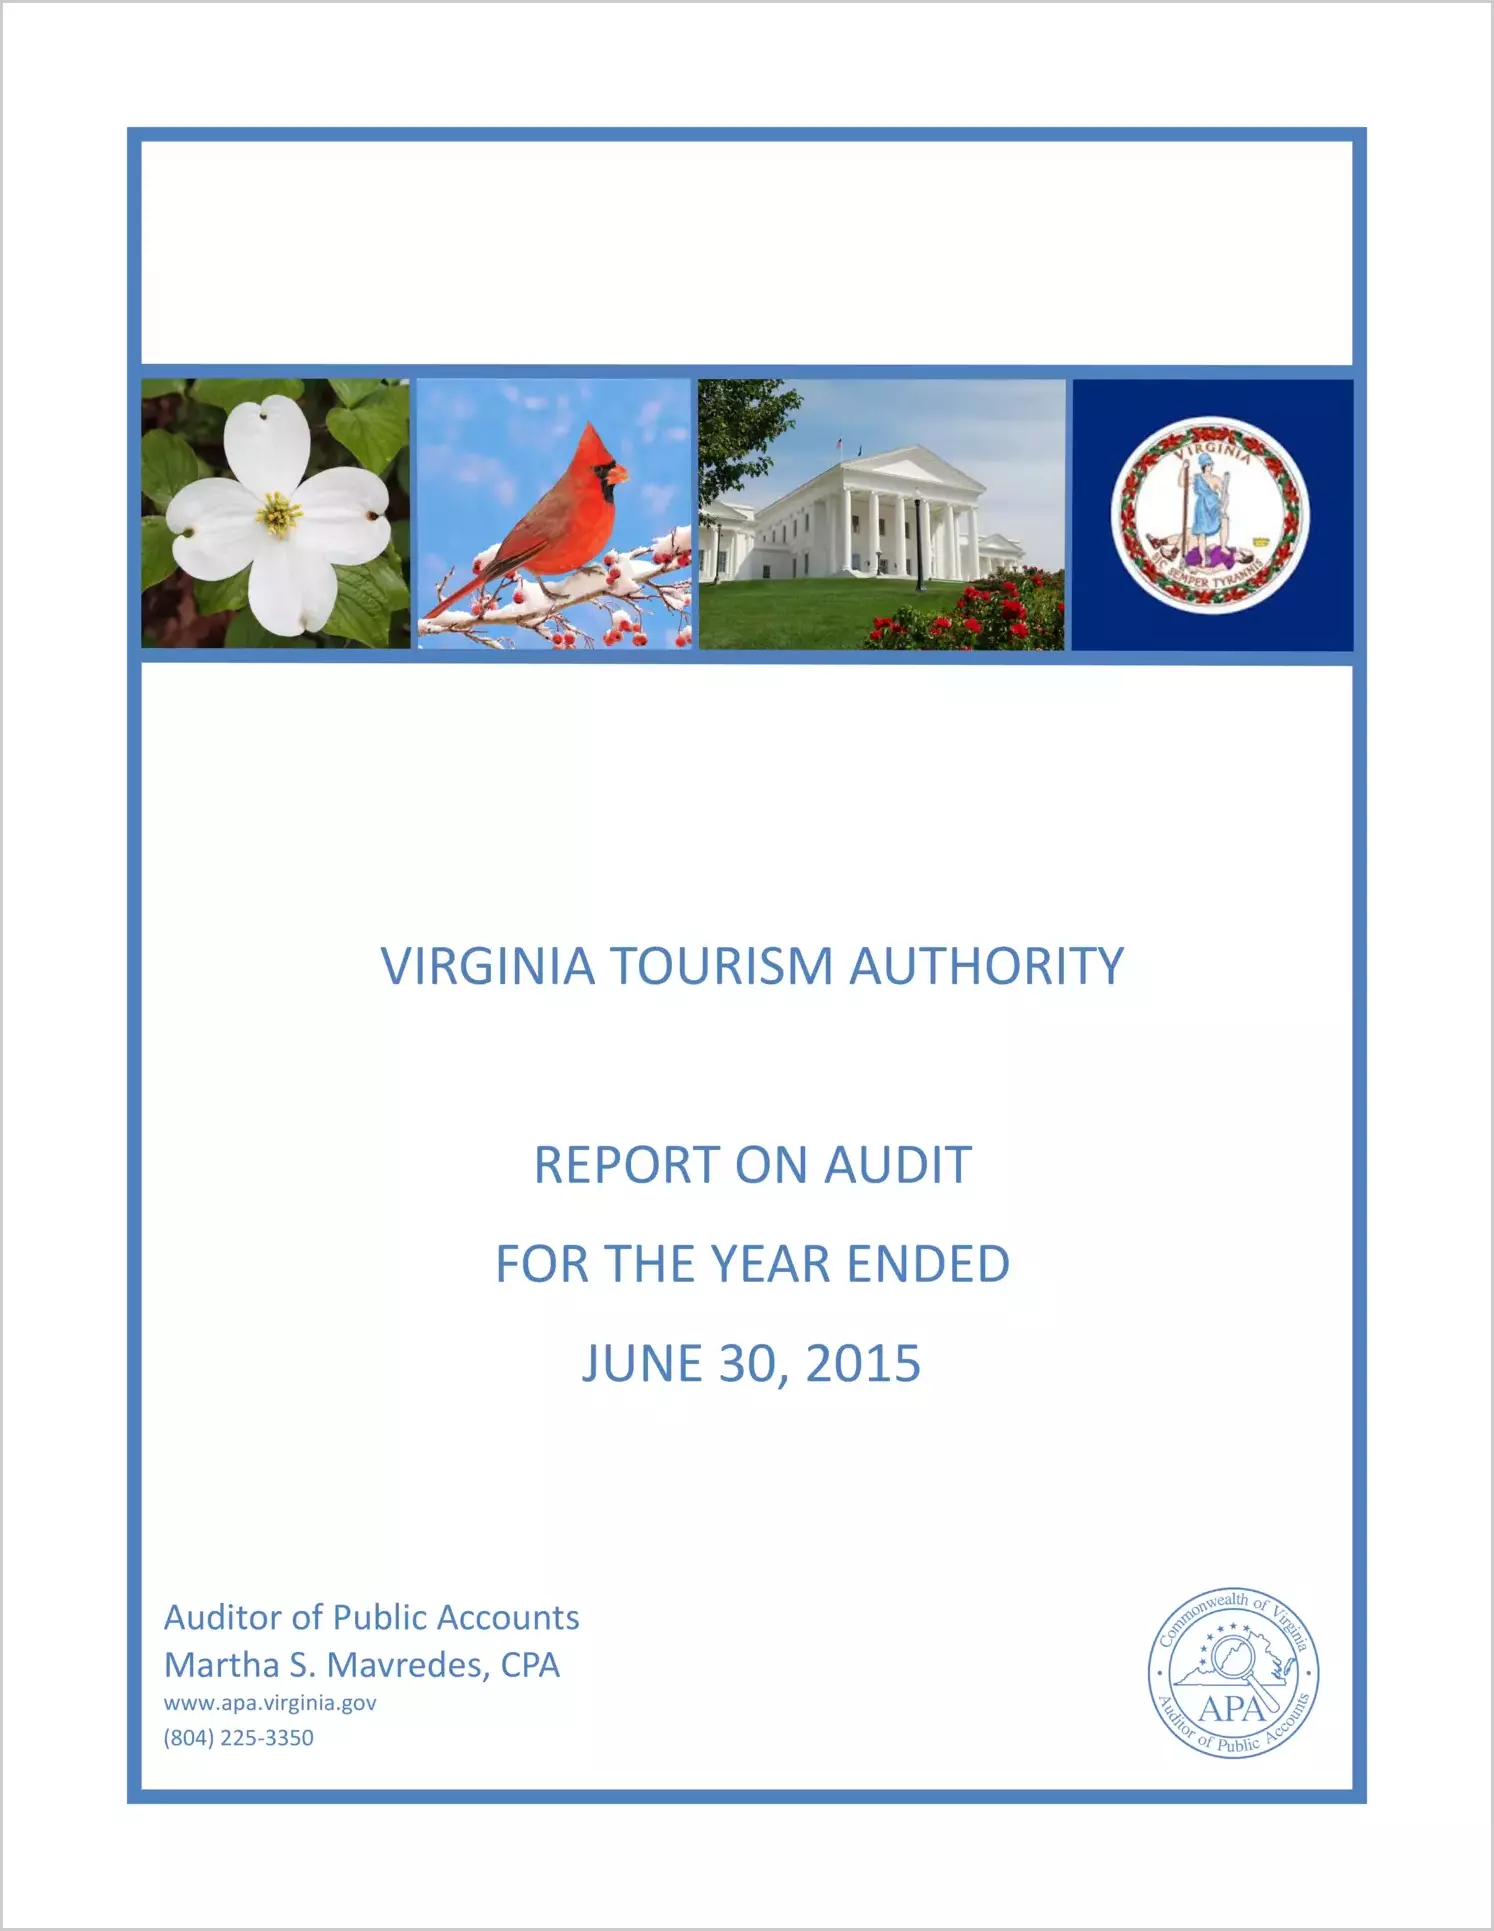 Virginia Tourism Authority for the year ended June 30, 2015